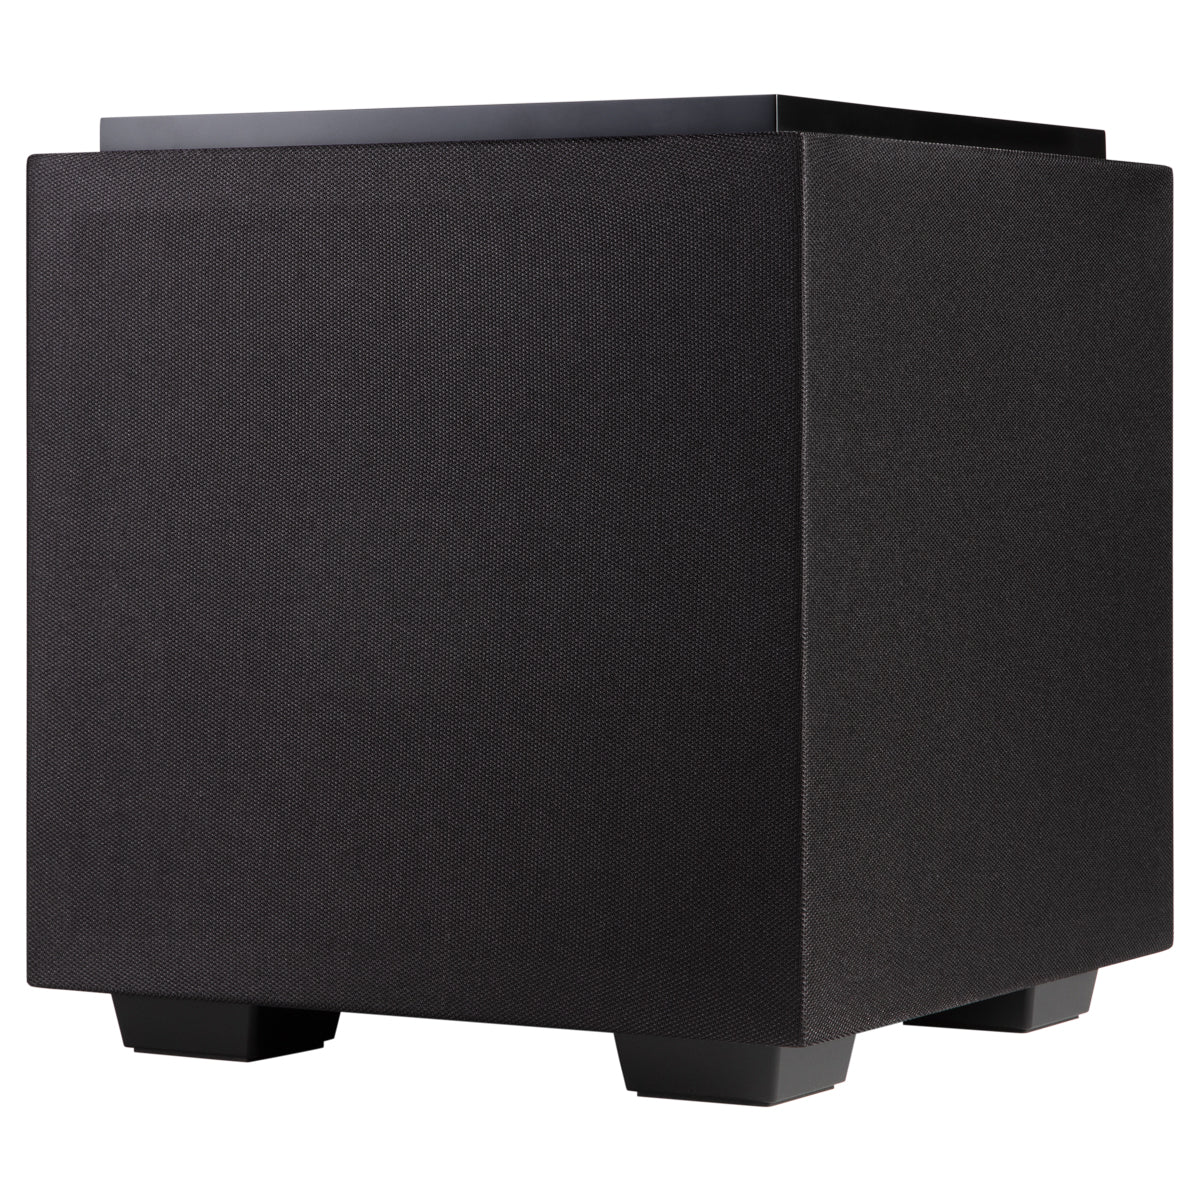 Definitive Technology DN8 Powered 8" Active Subwoofer - Black - The Audio Experts